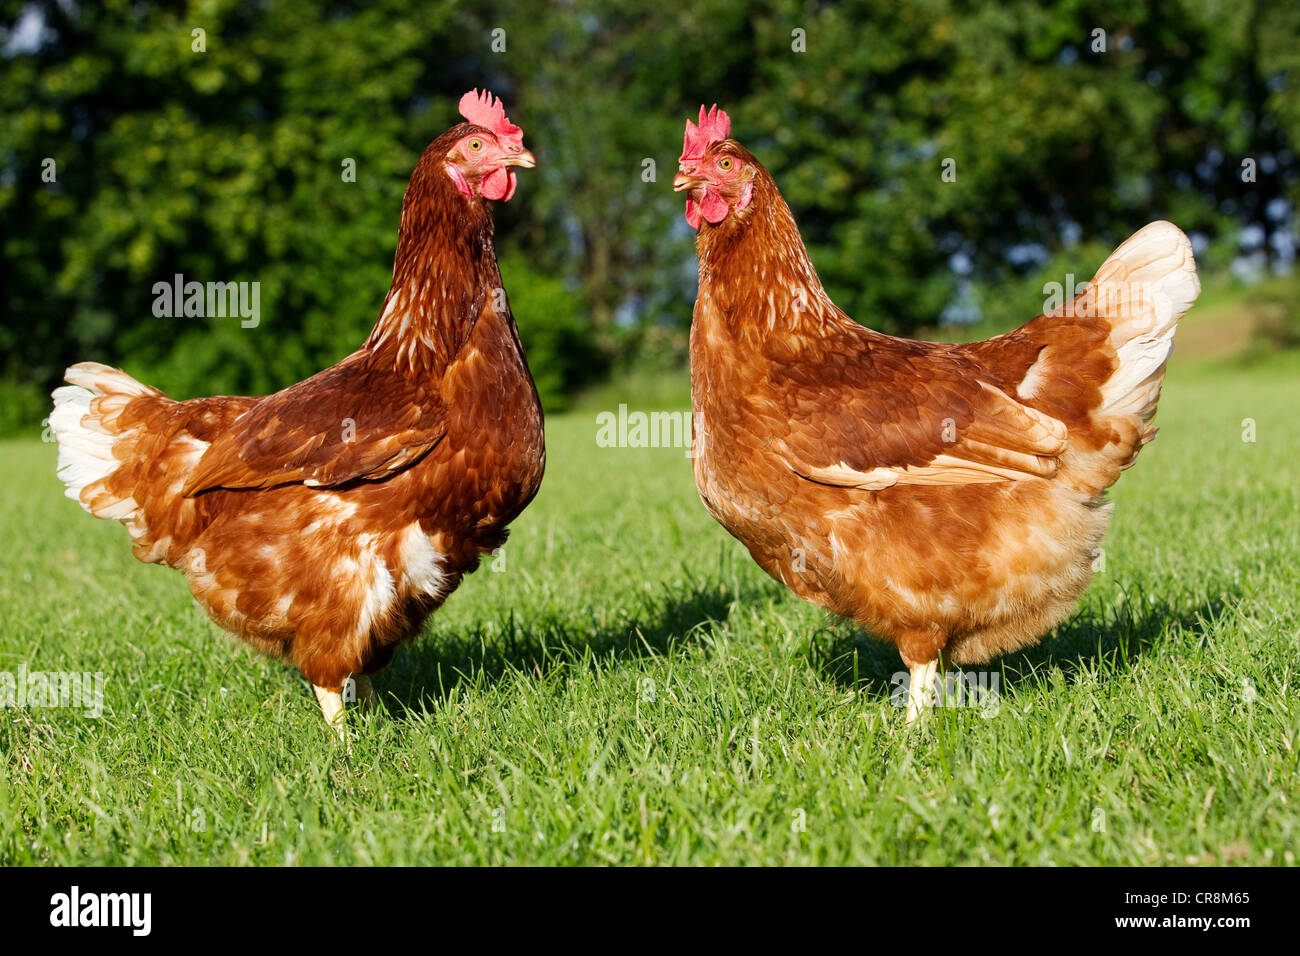 Two hens on grass Stock Photo